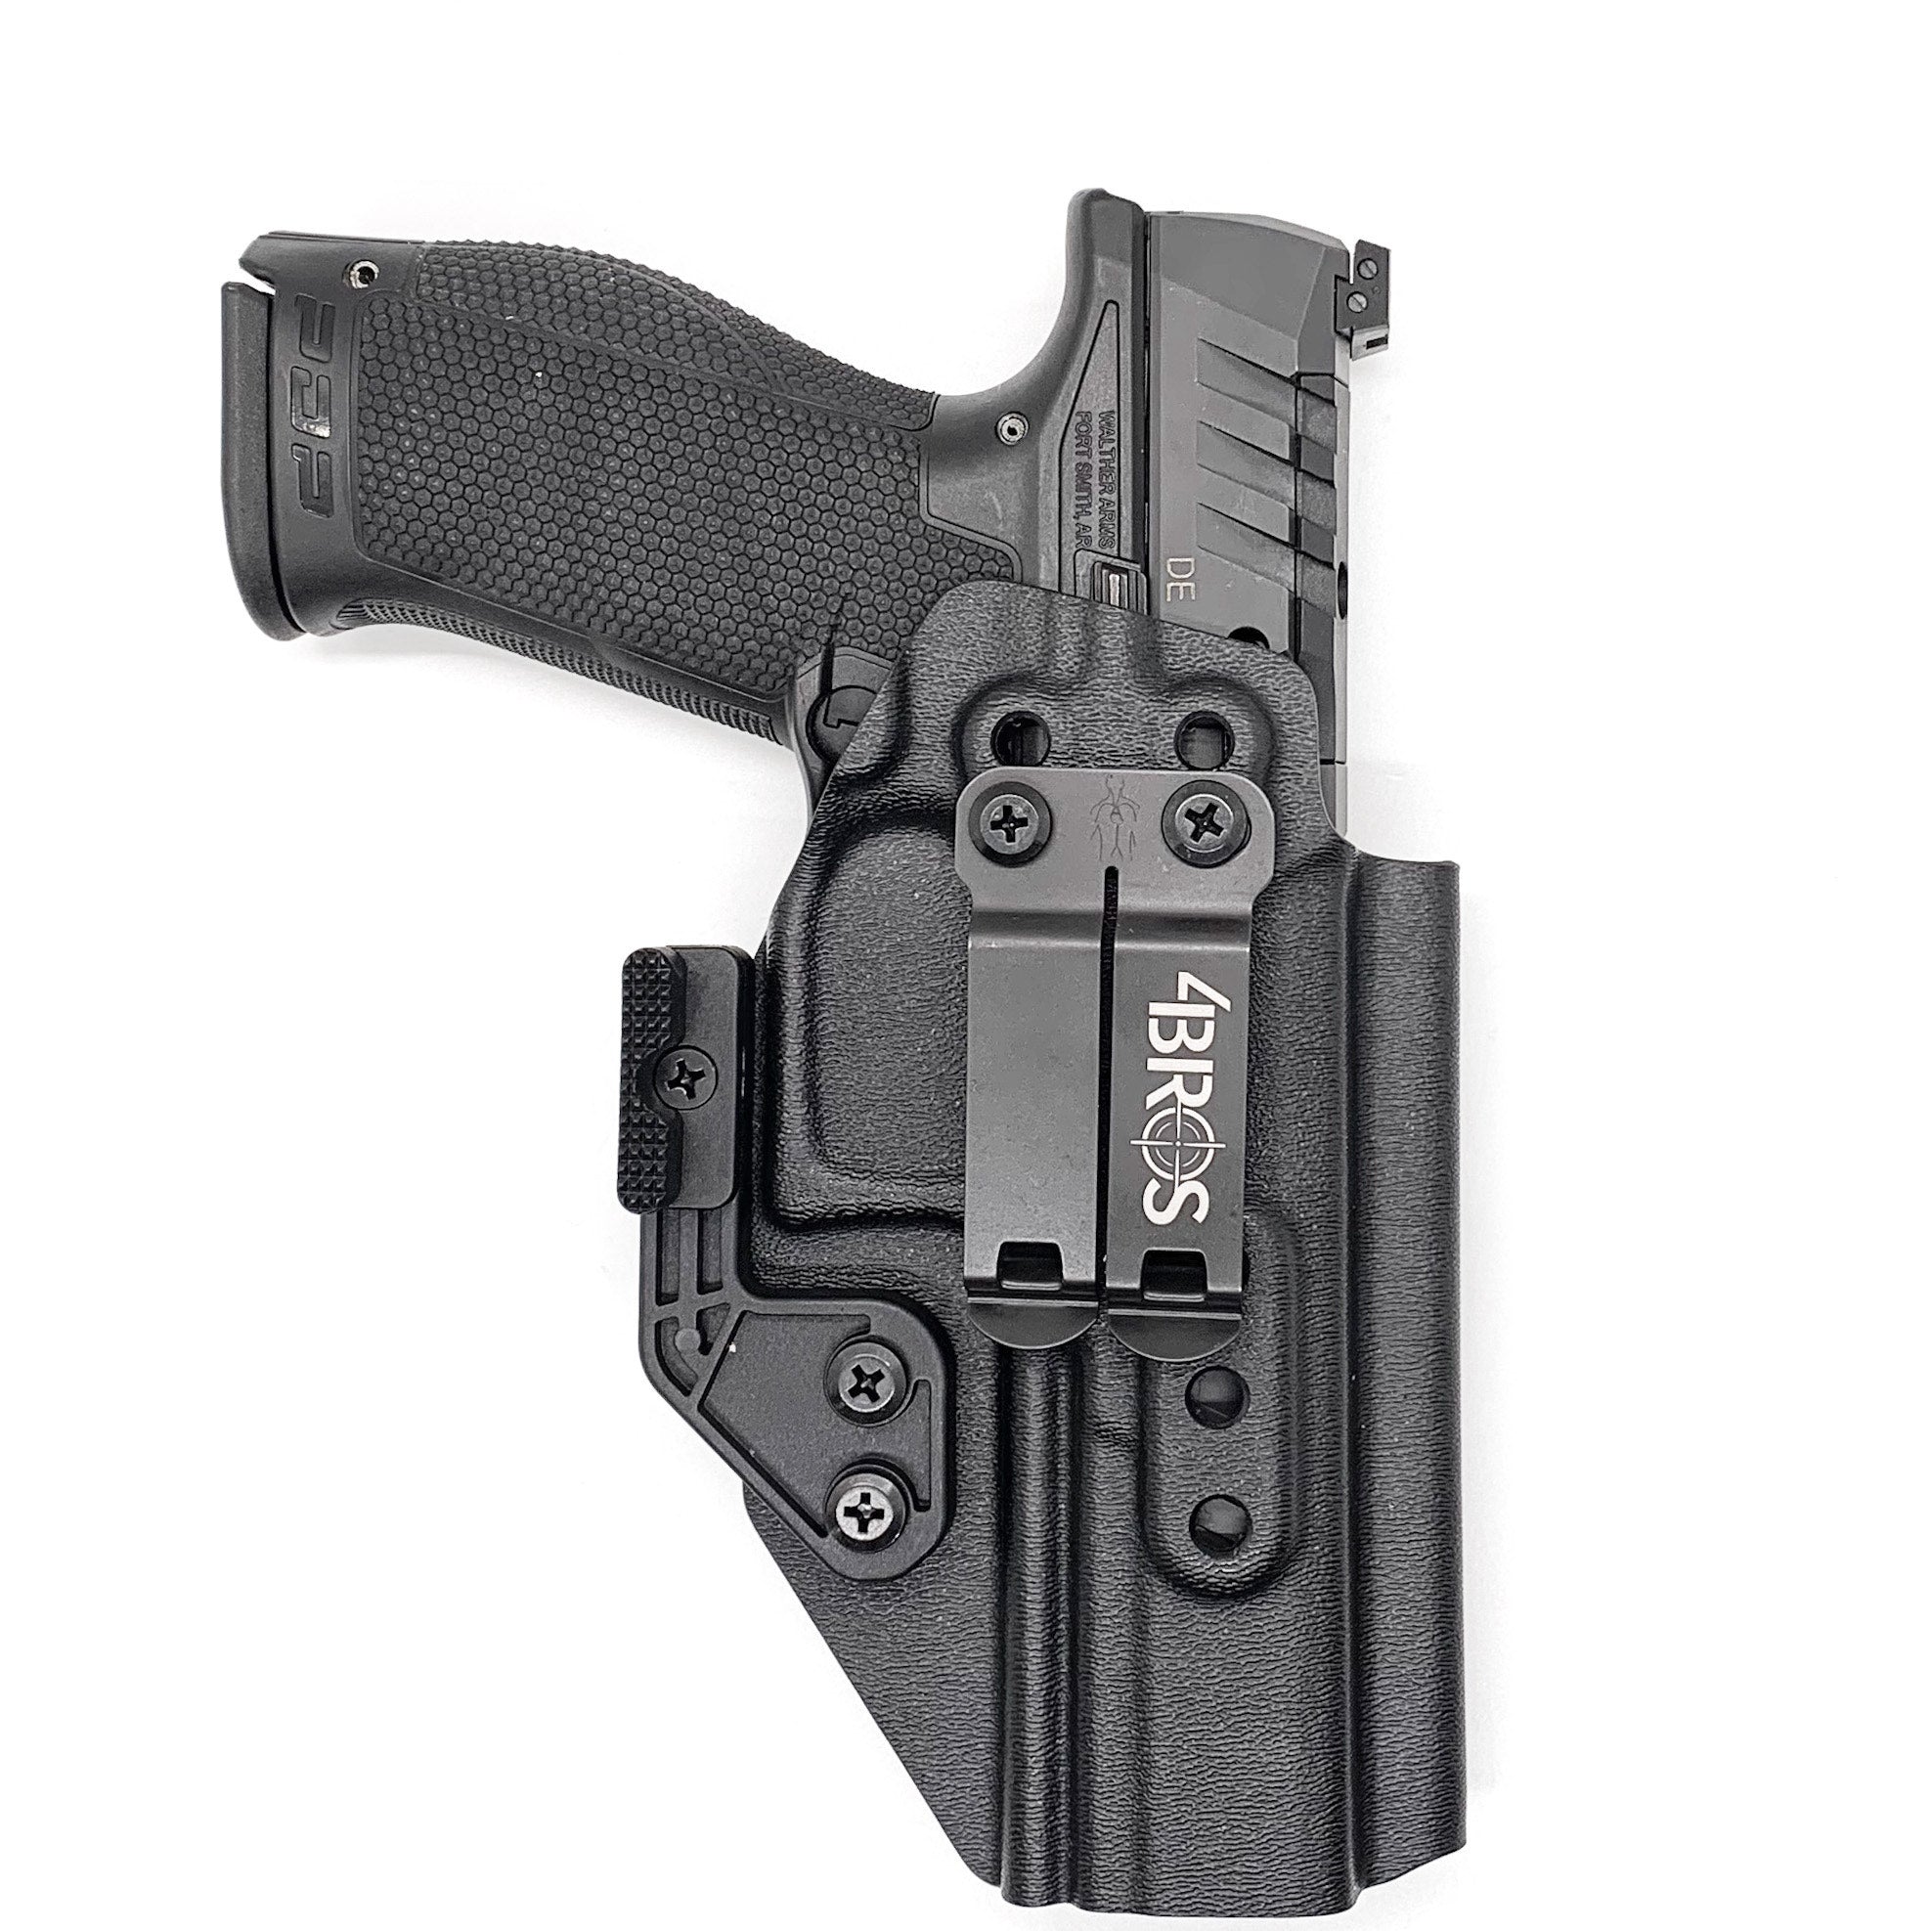 Inside Waistband IWB Holster designed to fit the Walther PDP Compact 5" pistol. Holster profile is cut to allow red dot sights to be mounted on the pistol.  This holster will fit the Full Size 5" and 5" Compact. Full sweat guard, adjustable retention and open muzzle for threaded barrels and compensators.